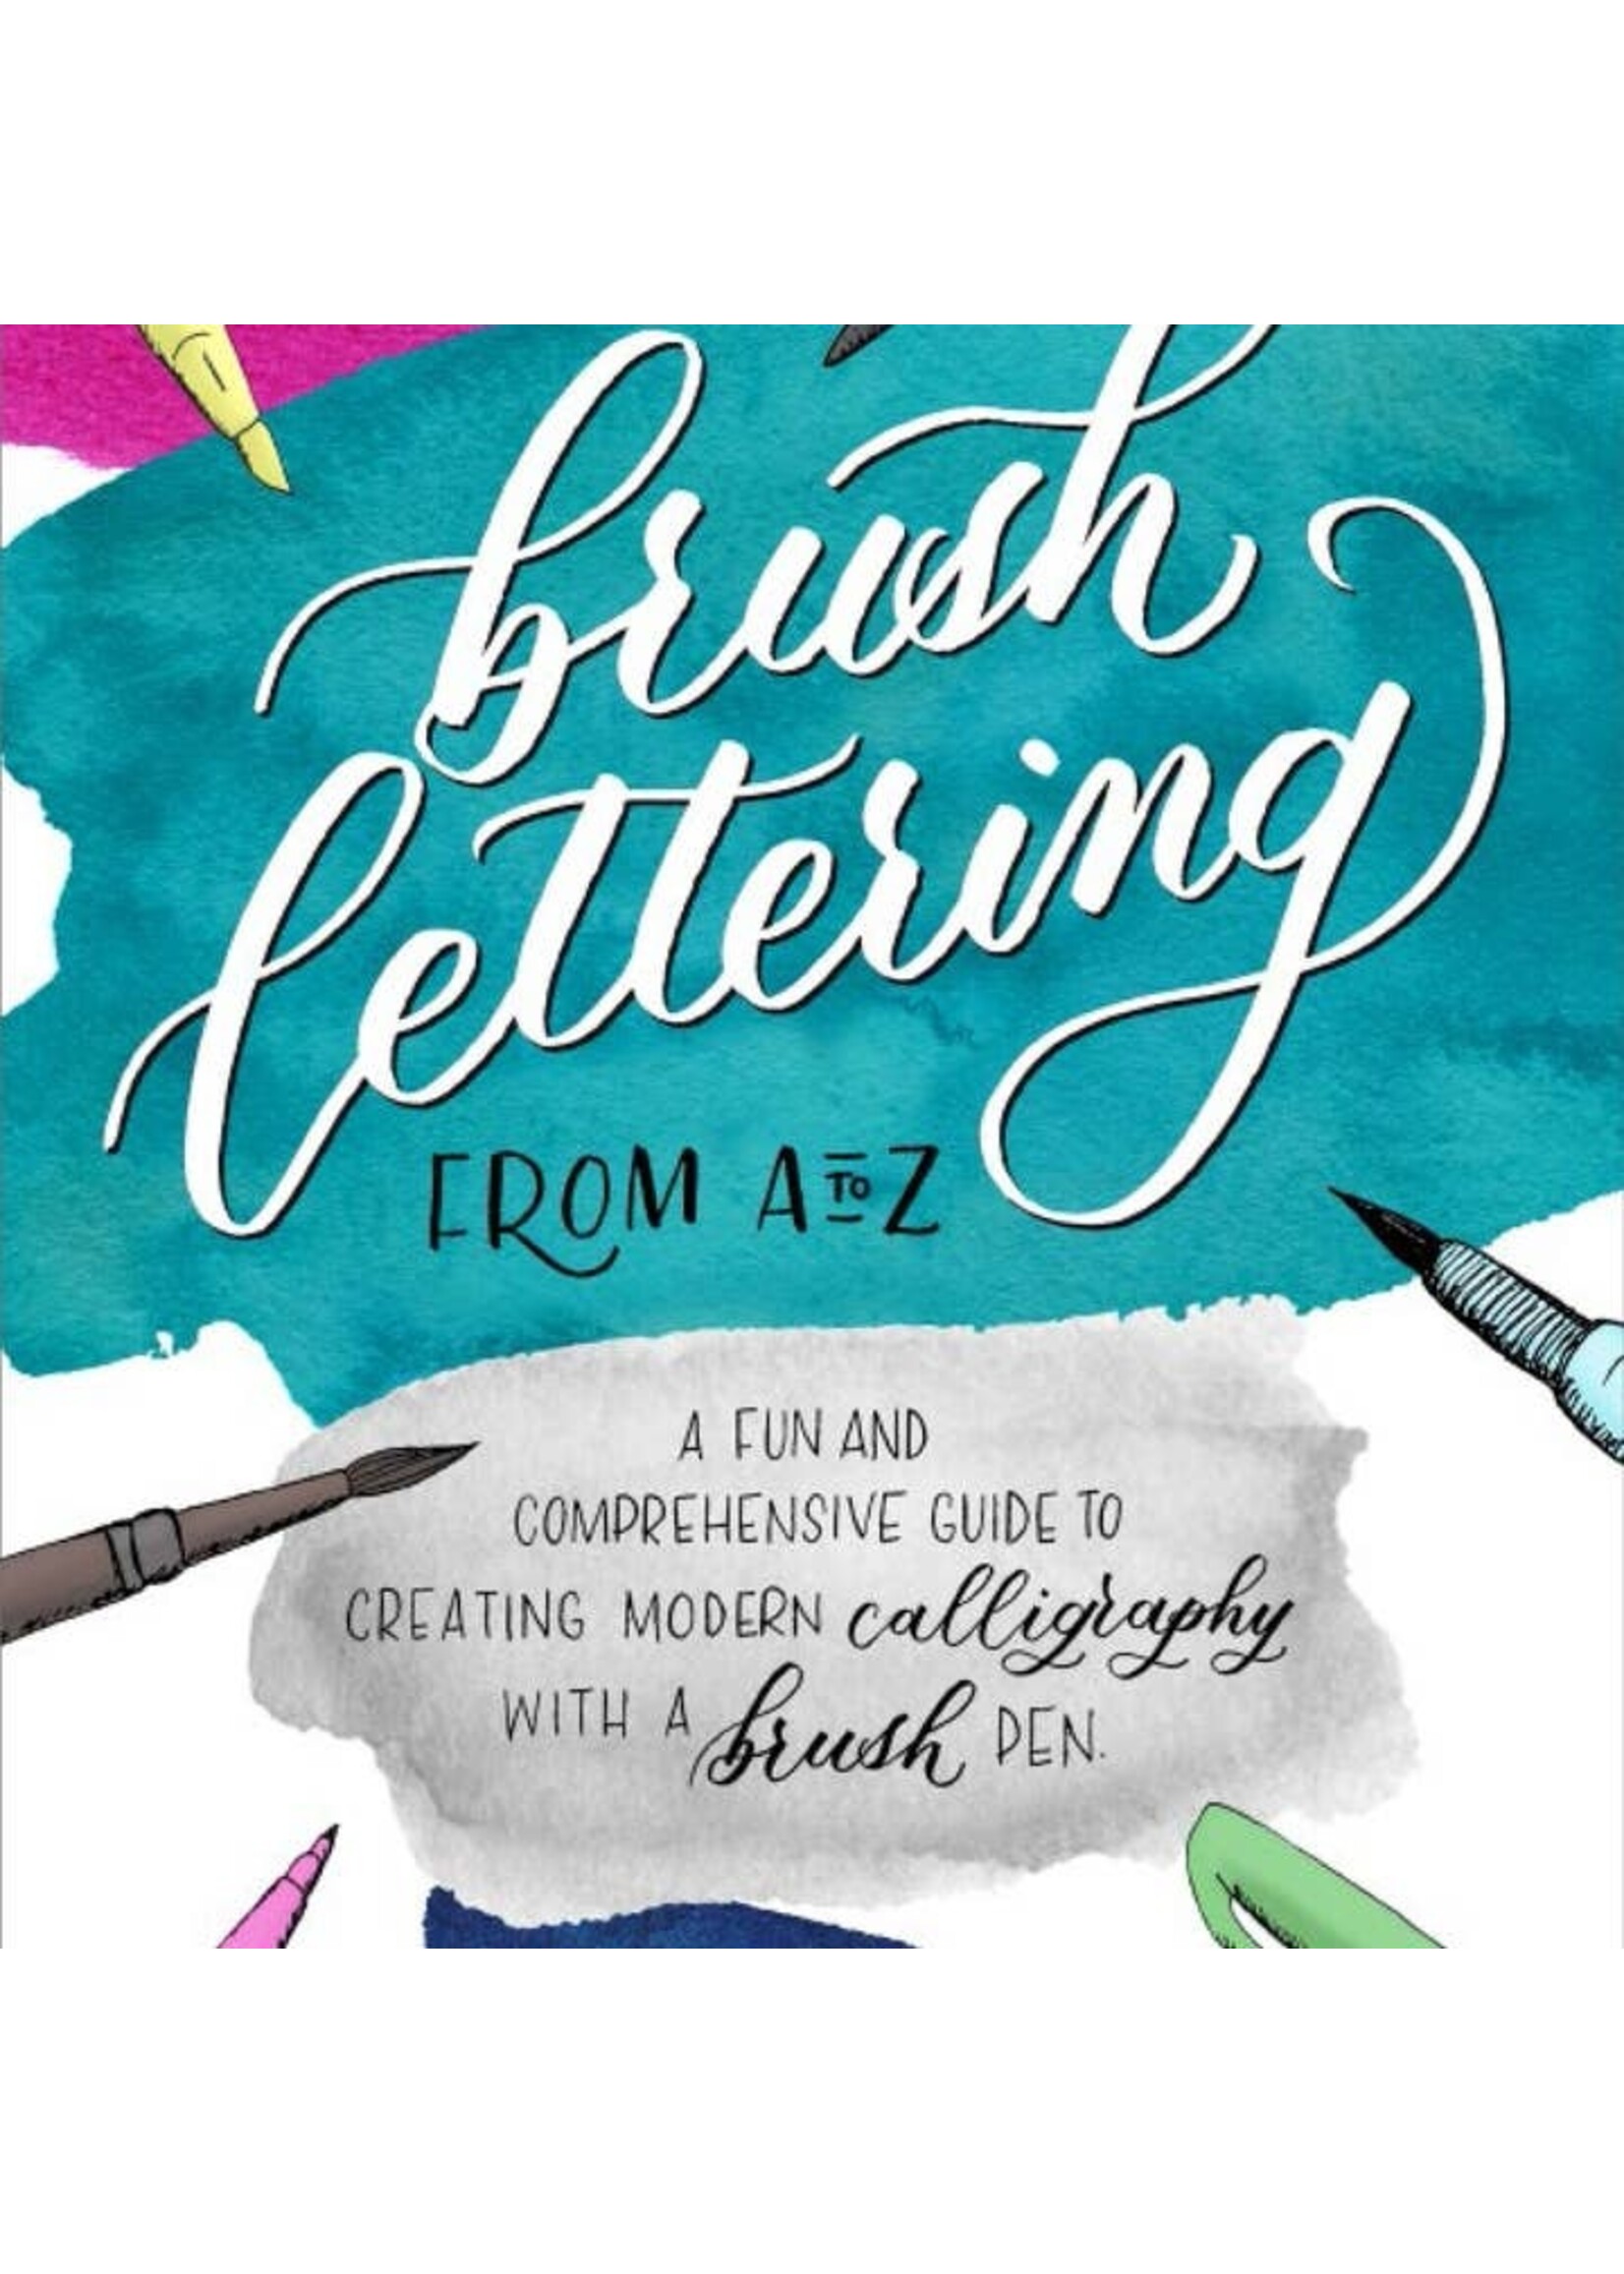 PPP BRUSH LETTERING FROM A TO Z